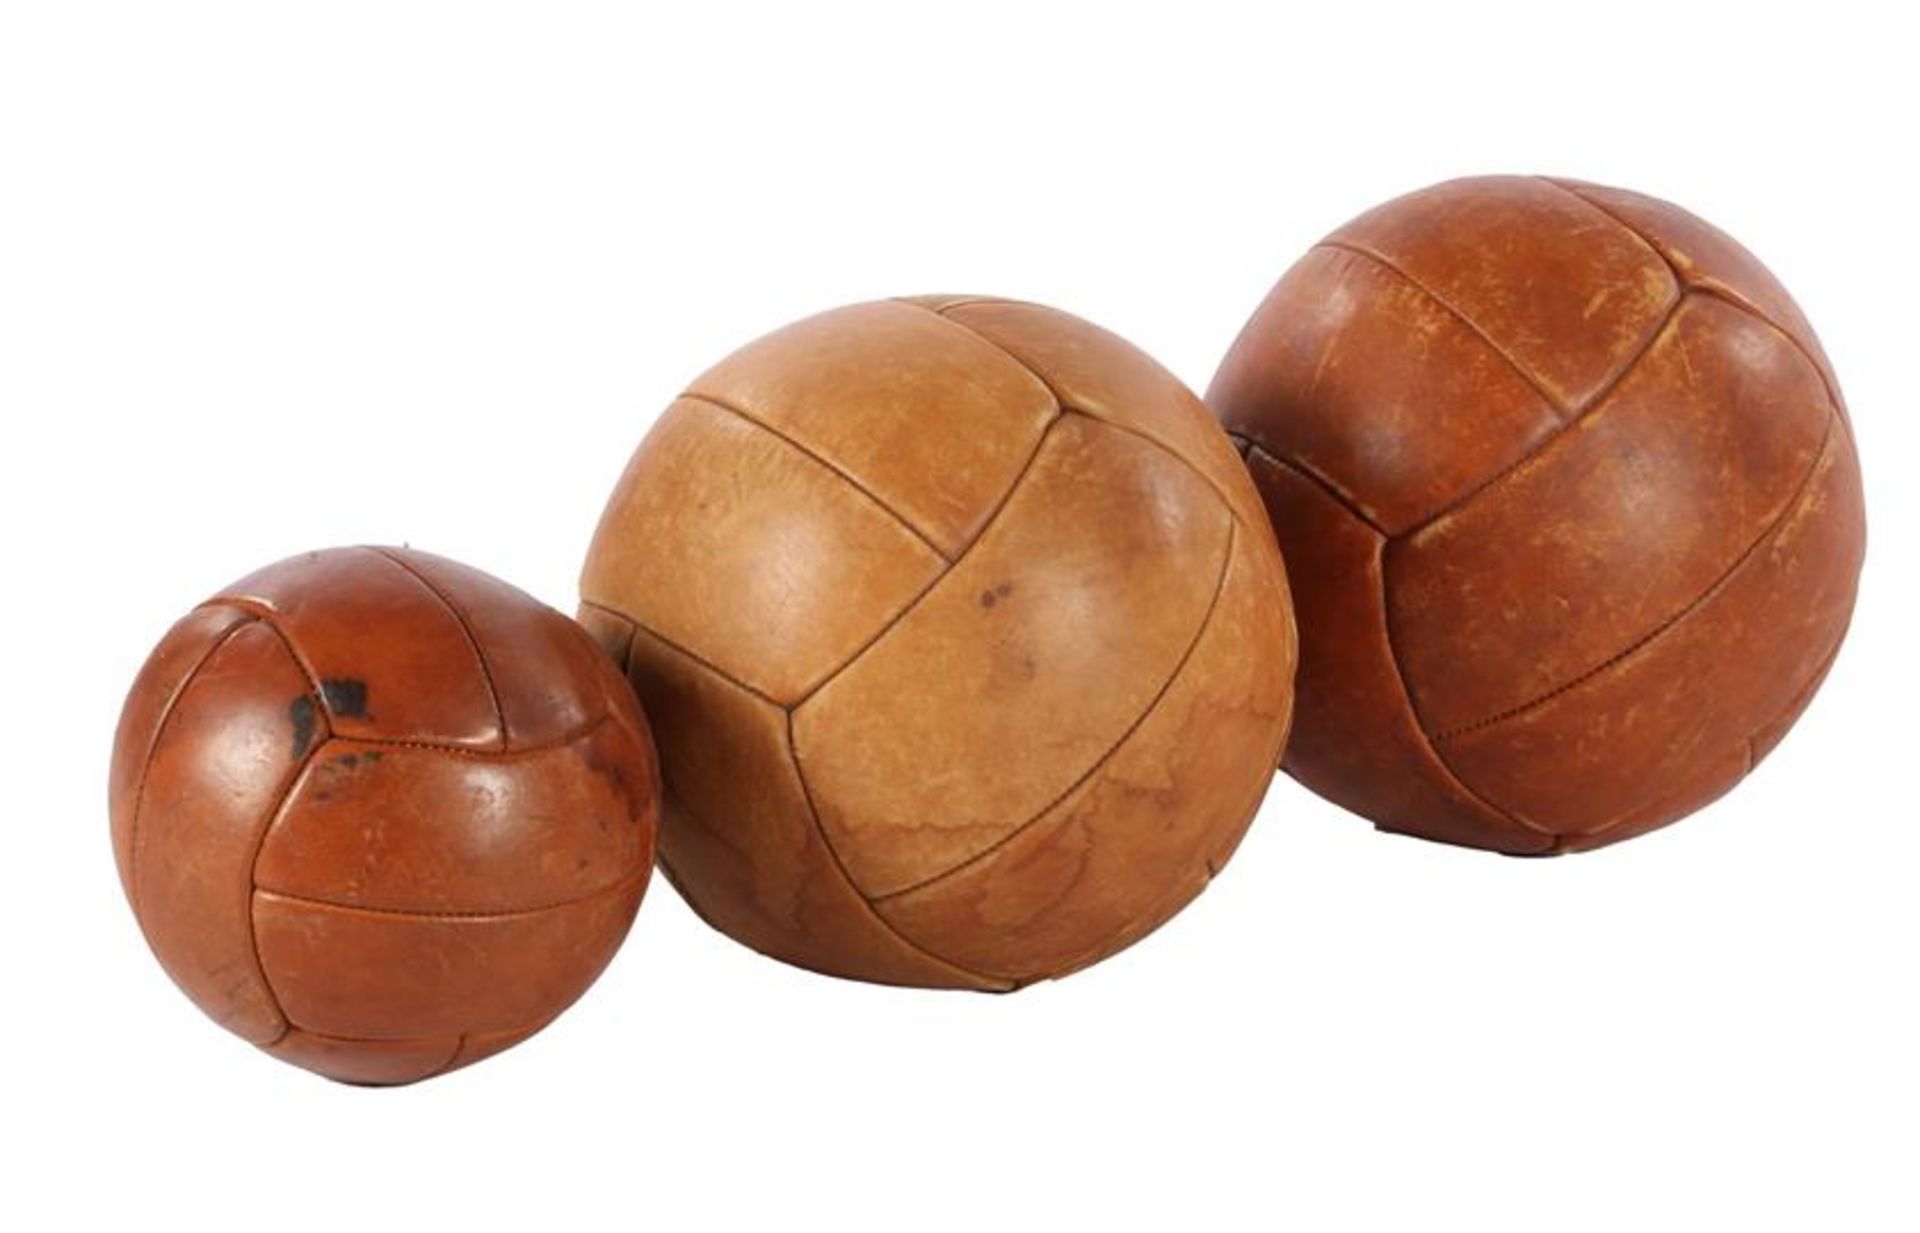 3 heavy leather balls, so-called medicine balls, 30, 29 and 22 cm in diameter